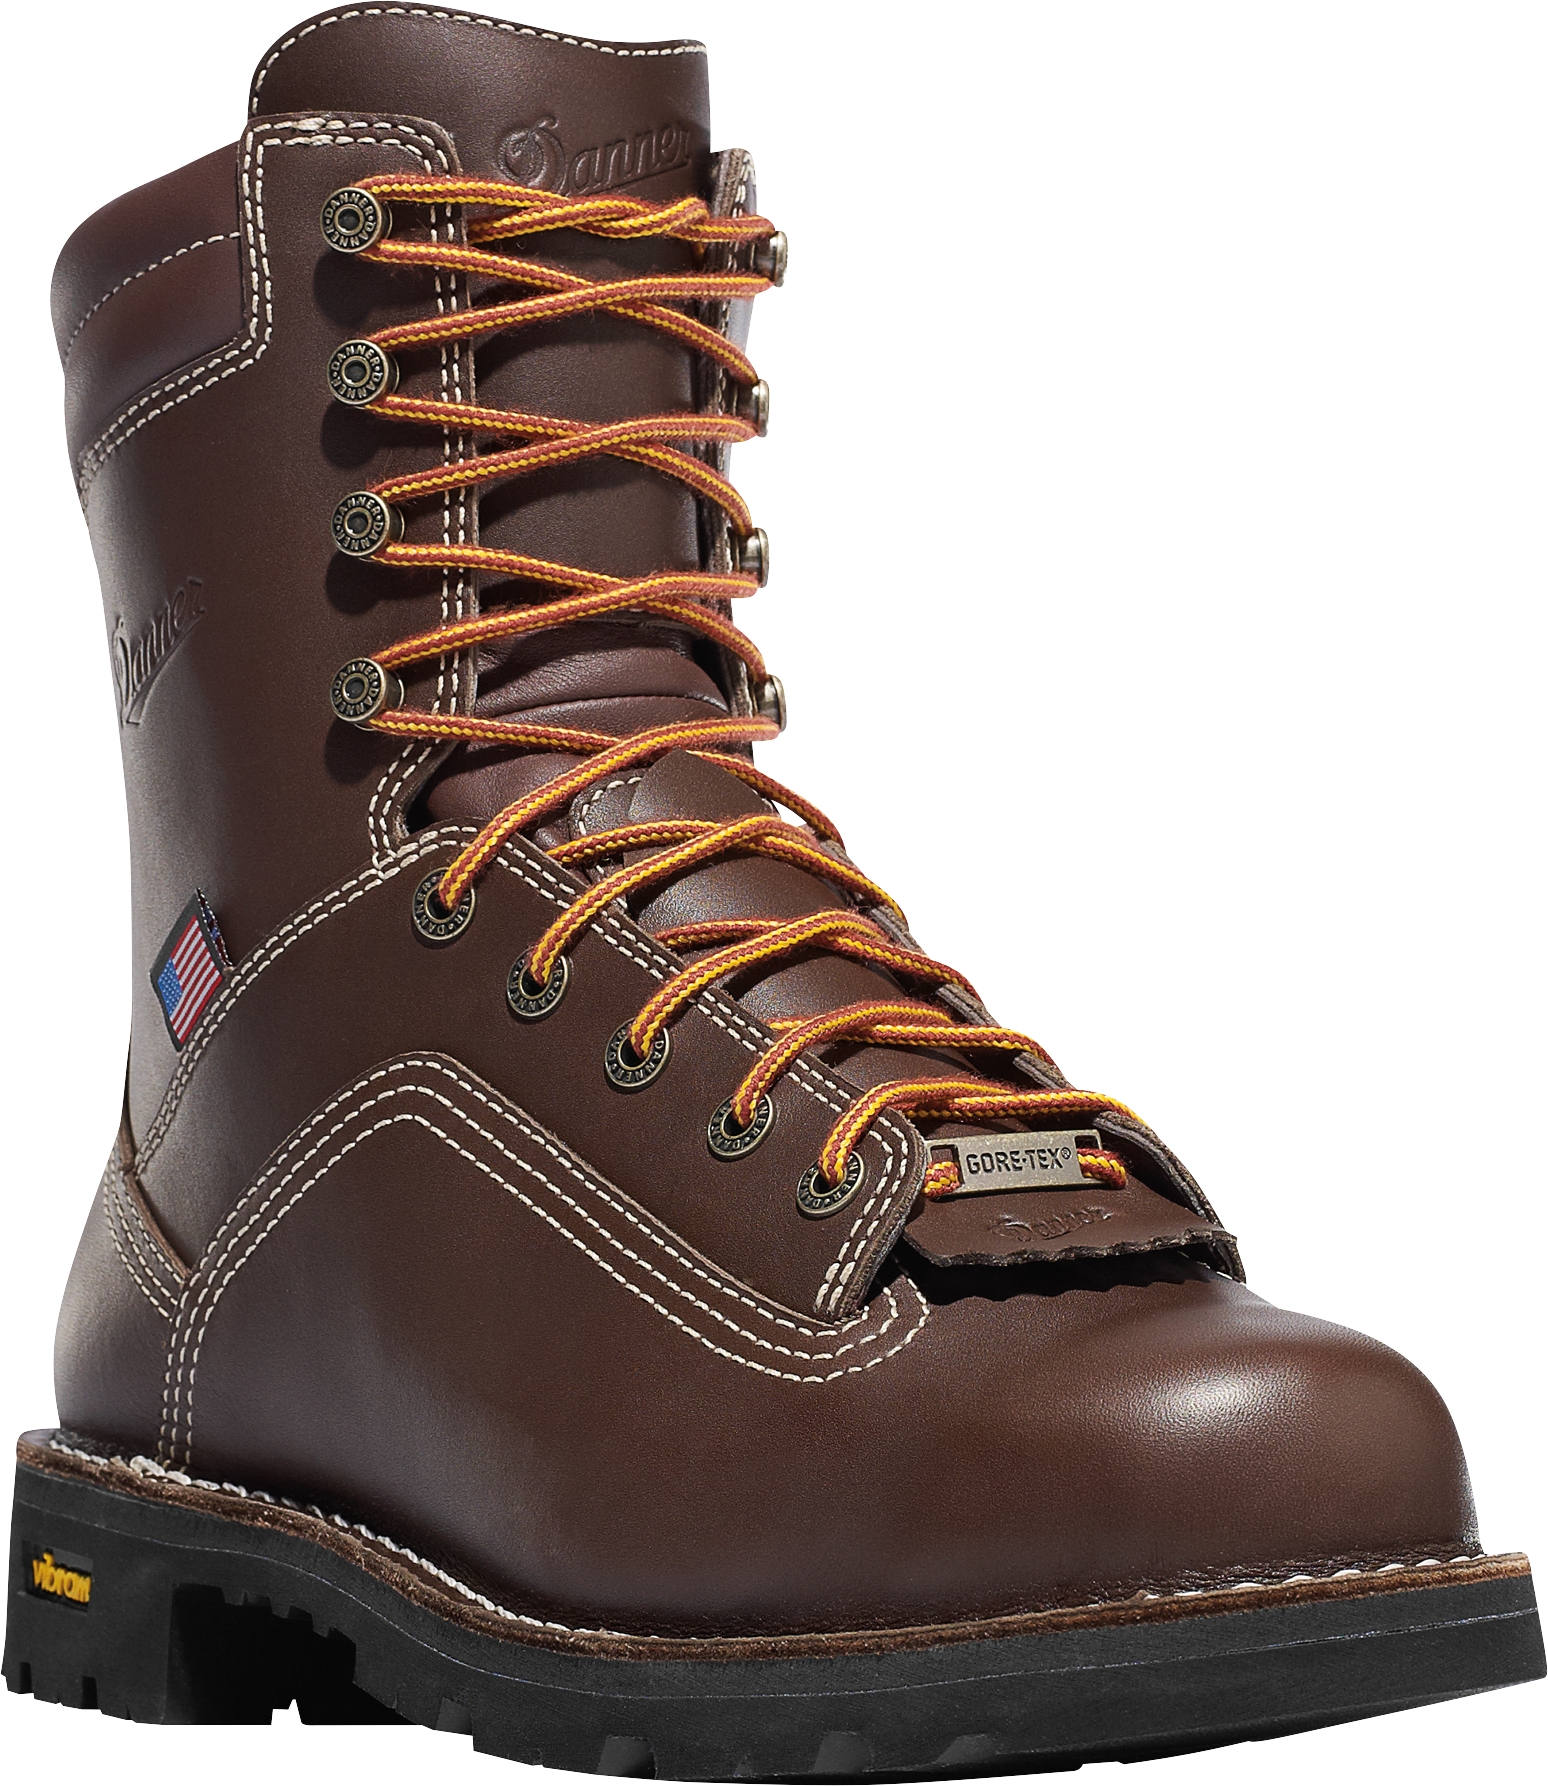 Danner Quarry USA Brown GORE-TEX Alloy Toe Work Boots for Men - Brown - 9M